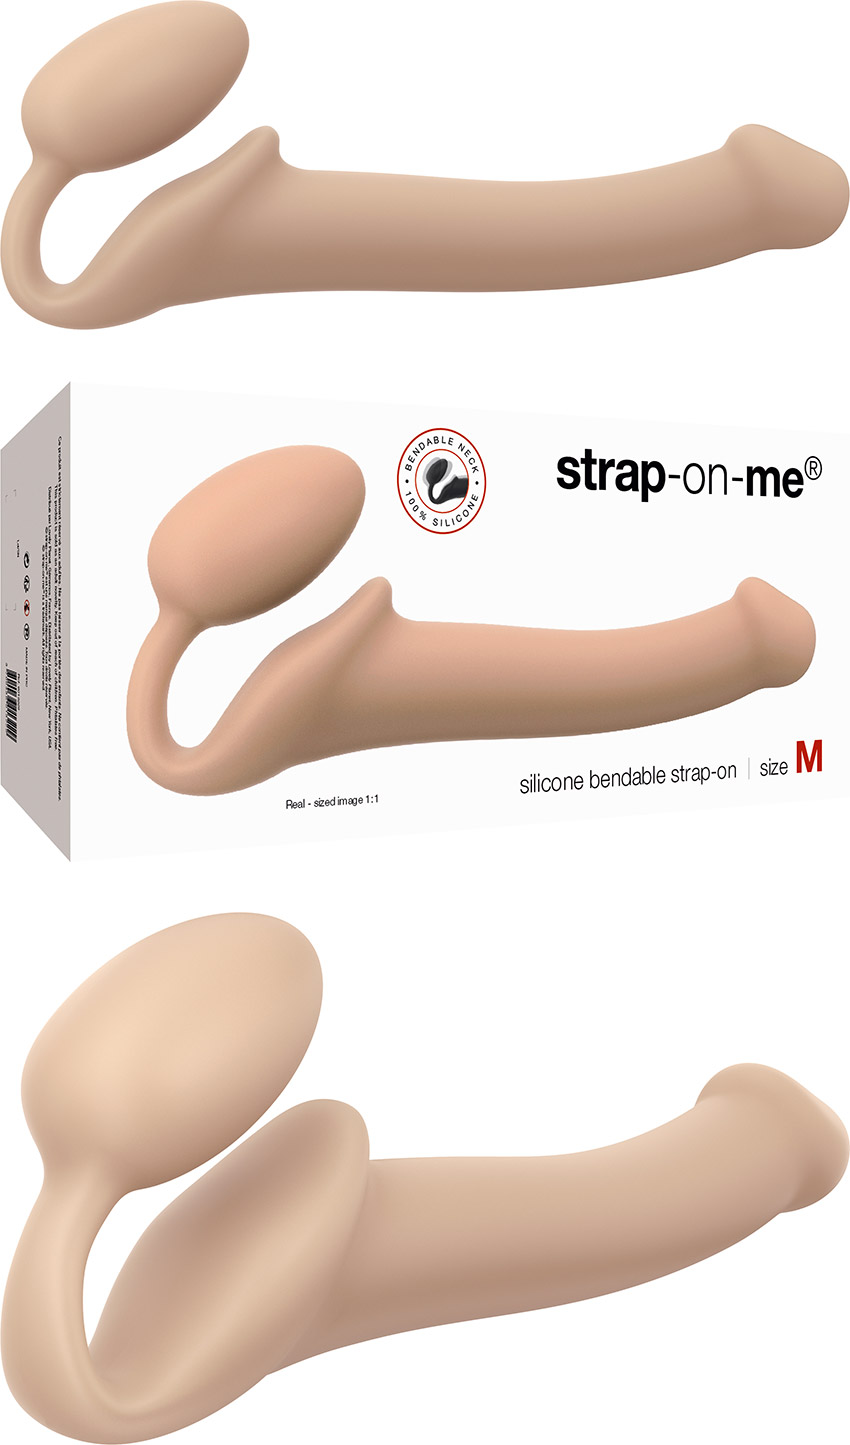 Double sex toy strap-on-me Bendable - Beige (M)